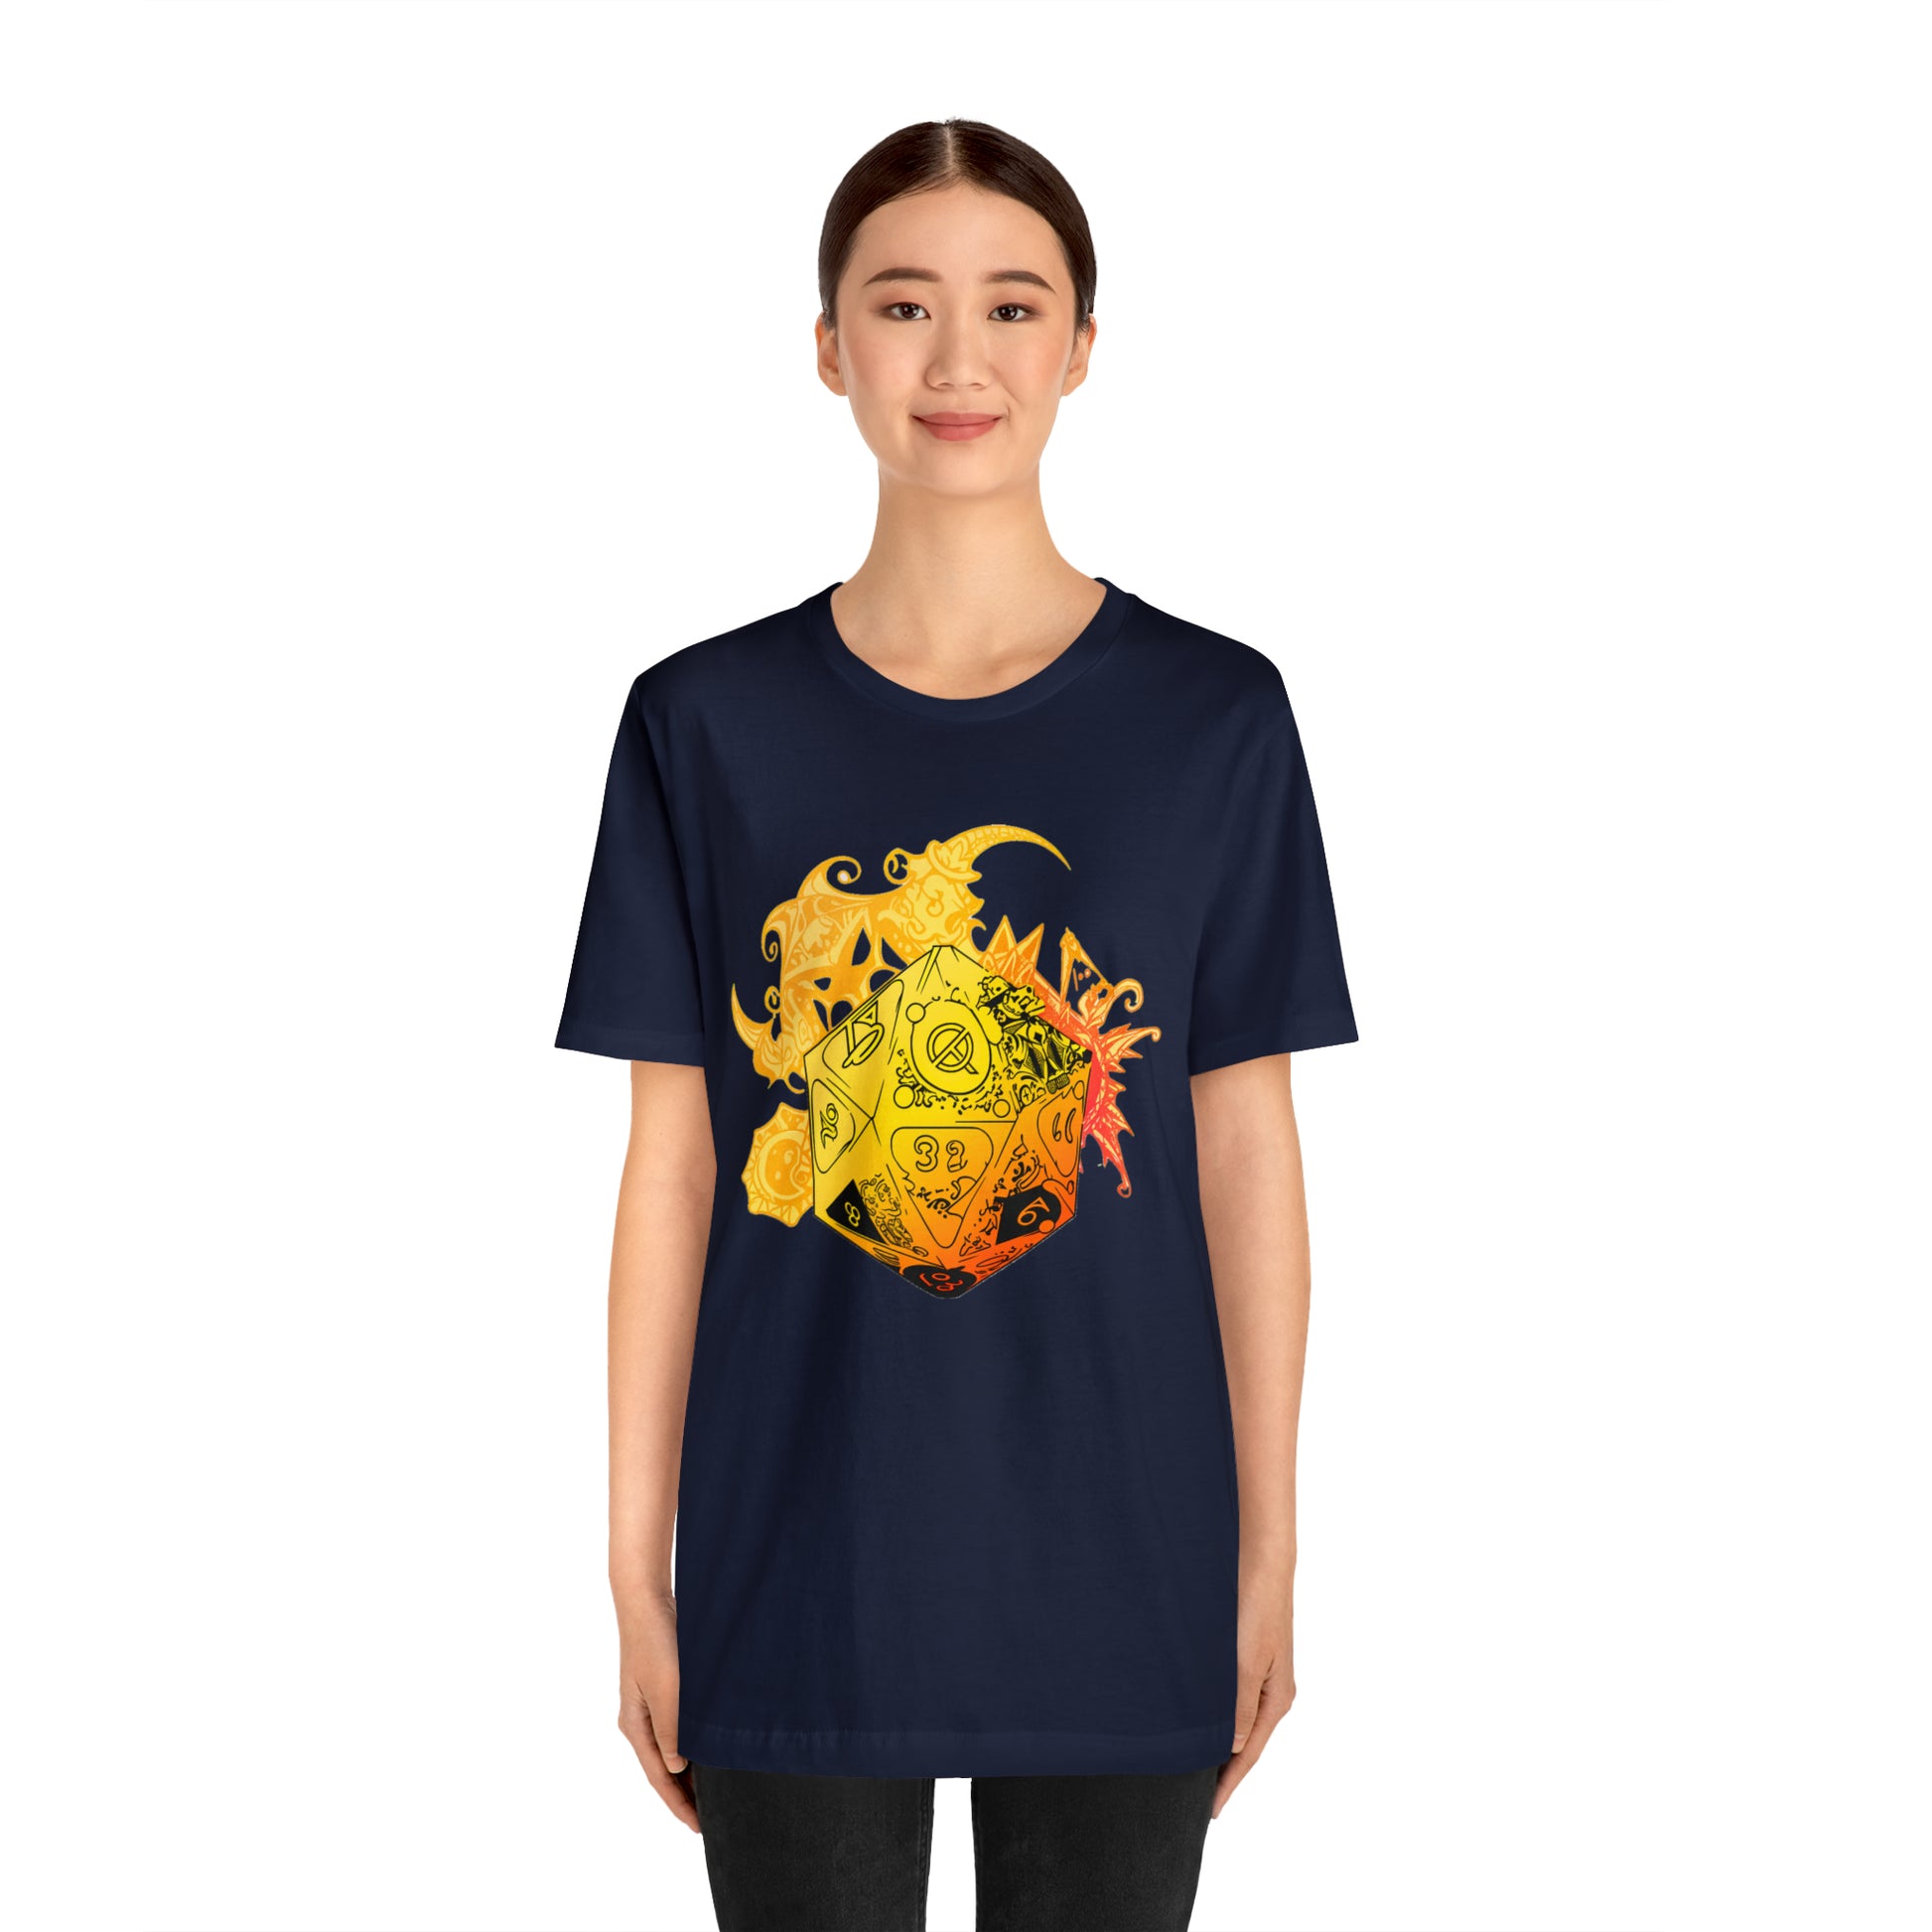 navy-quest-thread-tee-shirt-with-large-yellow-dragon-dice-on-center-of-shirt